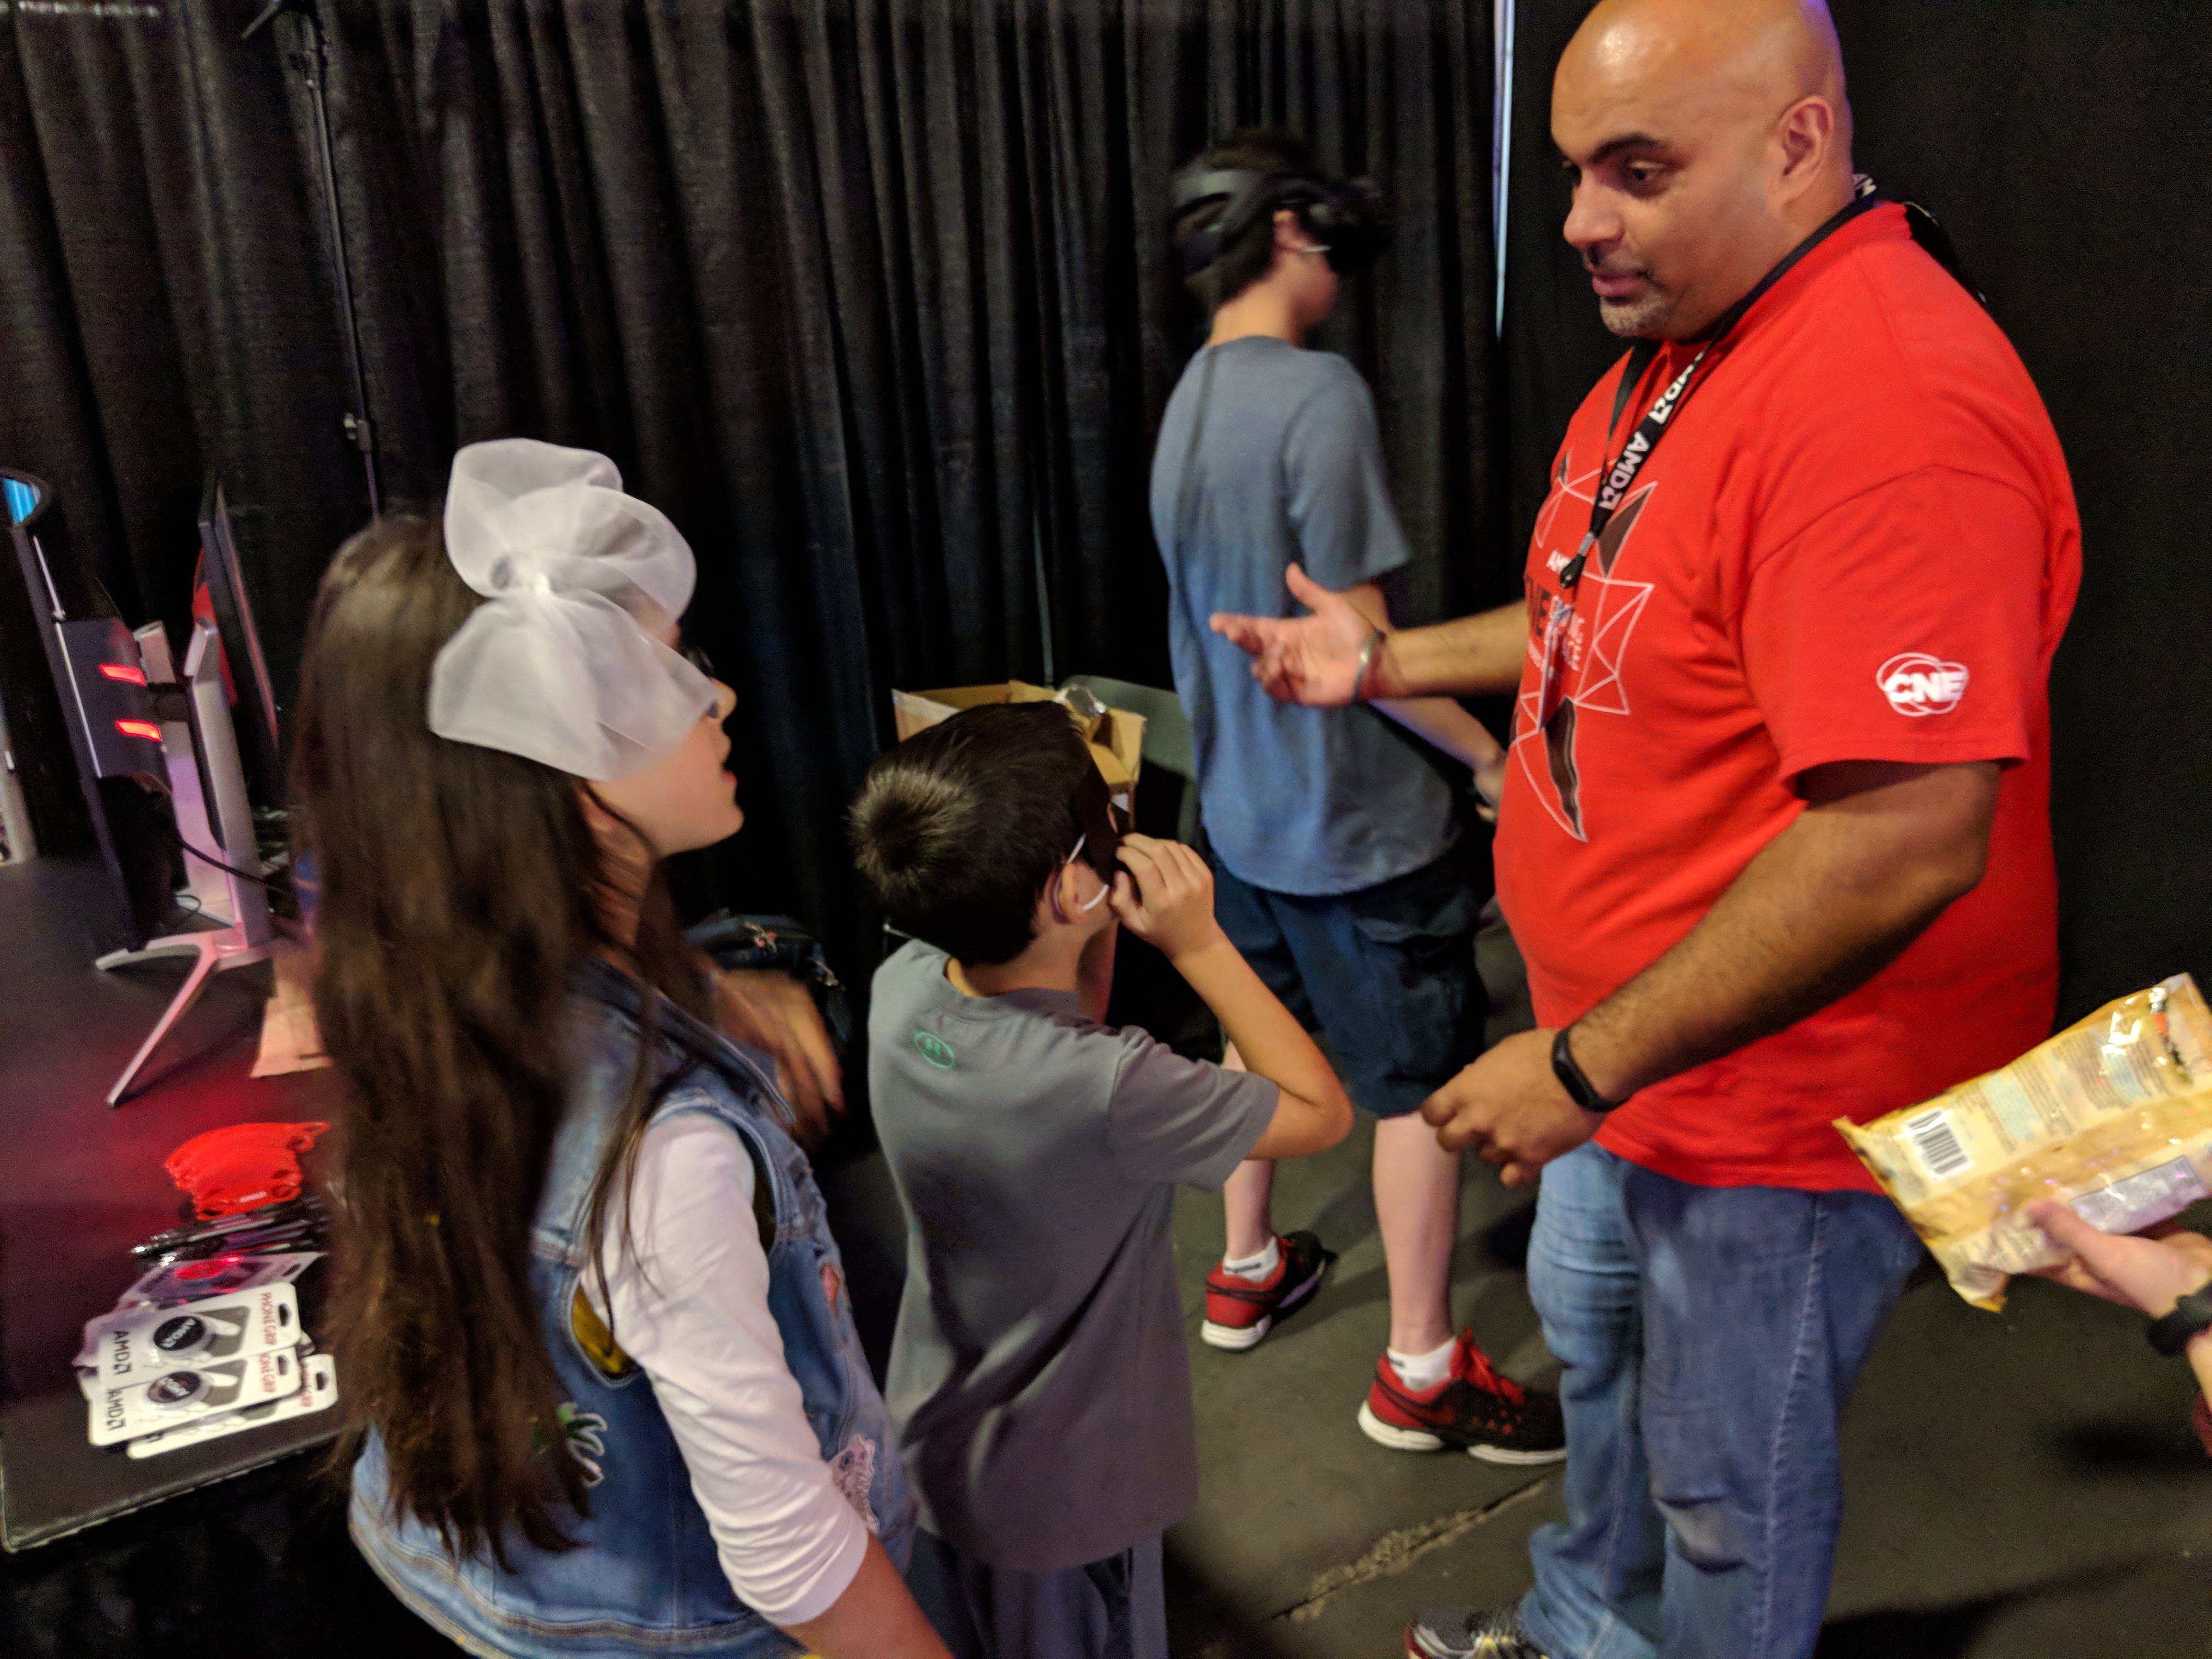 Sher one of the many AMD volunteers talking to kids about VR